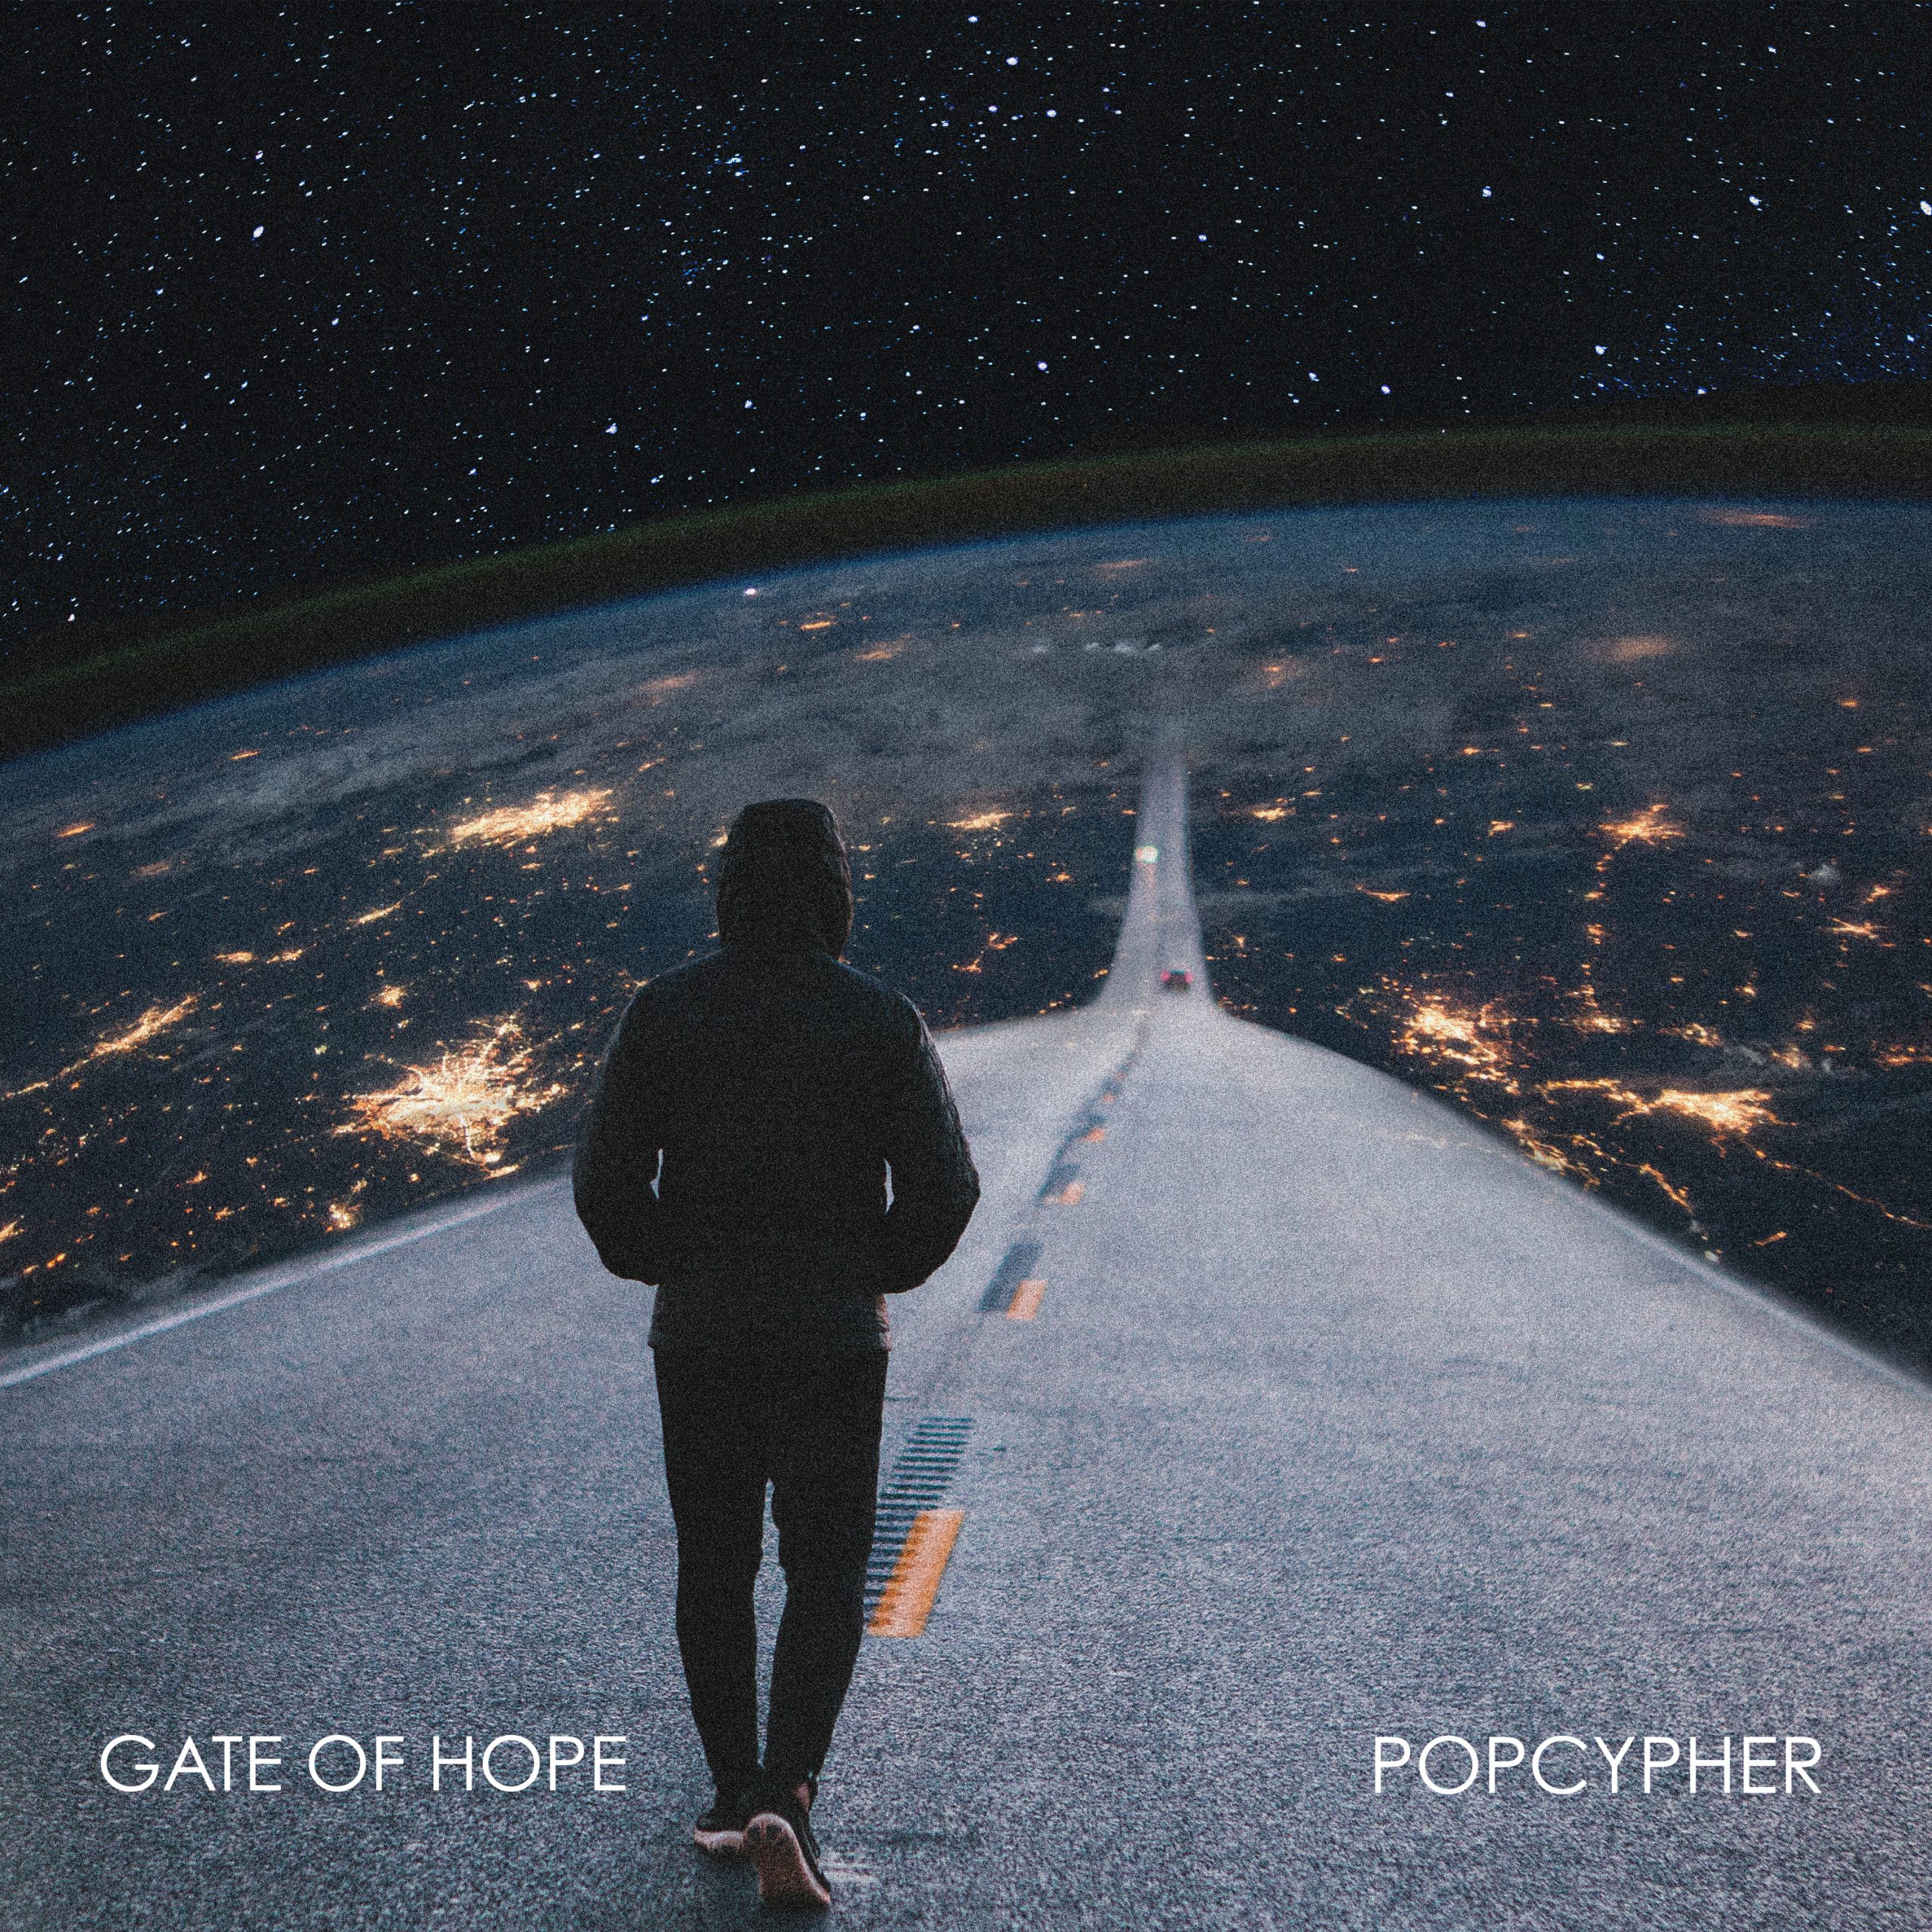 Inspired by Ed Sheeran, The Weeknd, Justin Bieber, Glass Animals, and David Guetta, ‘Popcypher’ drops new single ‘Gate of Hope’.